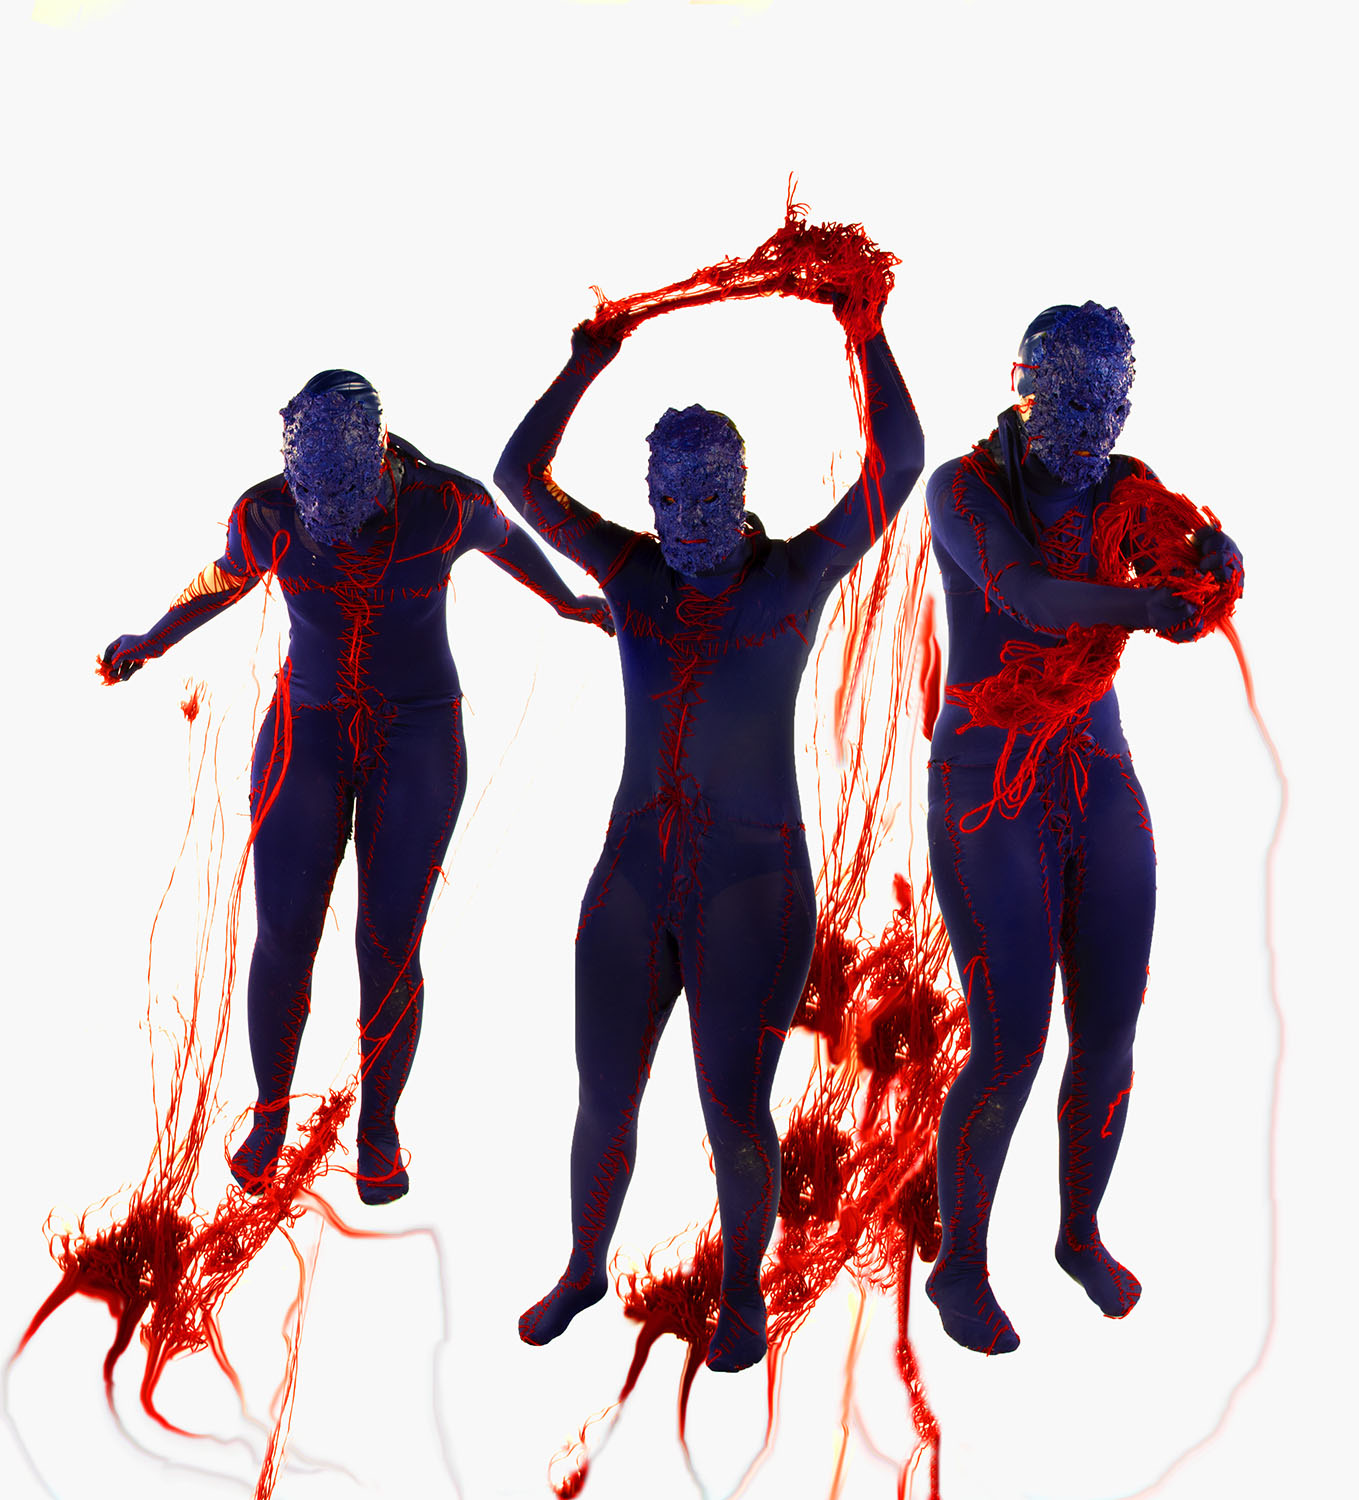 Three human figures covered in purple with textured purple faces, arms to the sides, arms above head, ripping and pulling at bloody red yarn